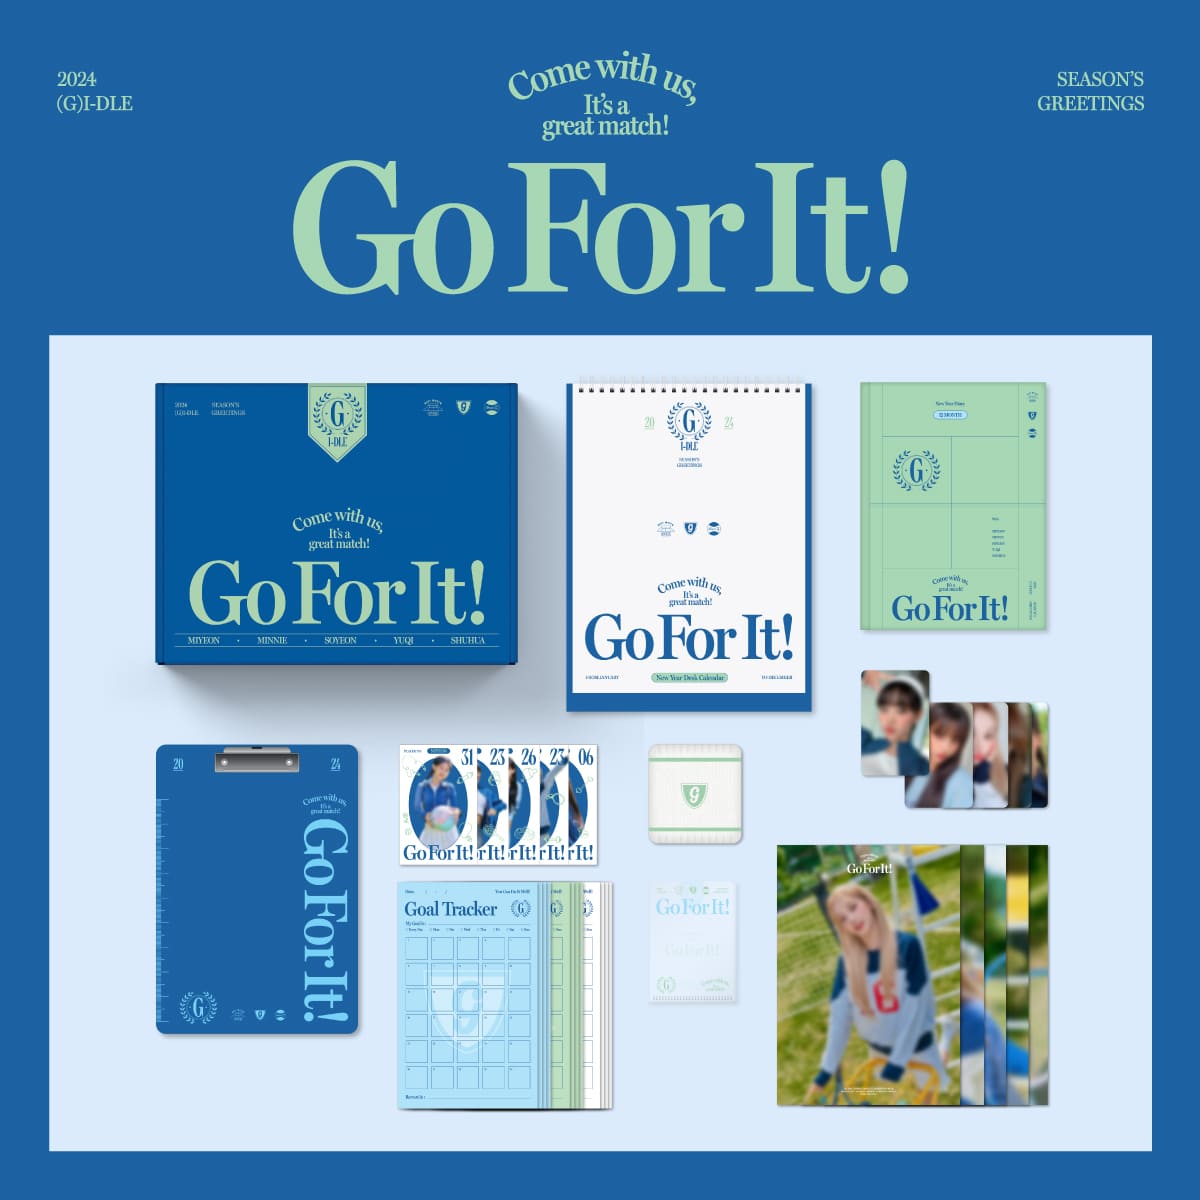 (G)I-DLE 2024 Season's Greetings Go For It!